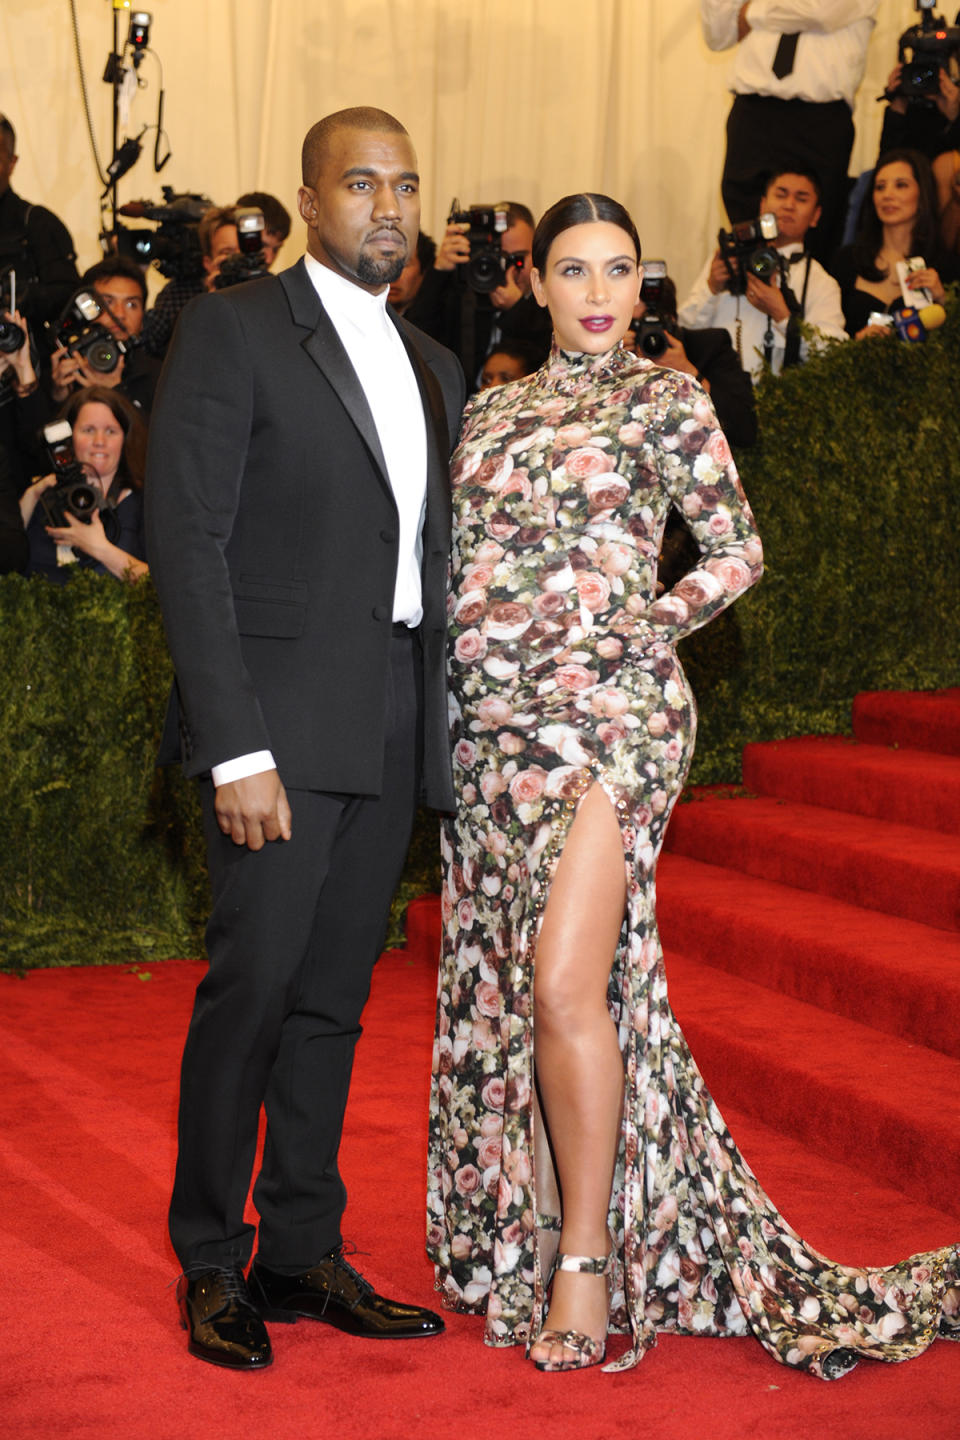 NEW YORK, NY - MAY 06: Kanye West and Kim Kardashian attends the Costume Institute Gala for the "PUNK: Chaos to Couture" exhibition at the Metropolitan Museum of Art on May 6, 2013 in New York City. (Photo by Rabbani and Solimene Photography/WireImage)